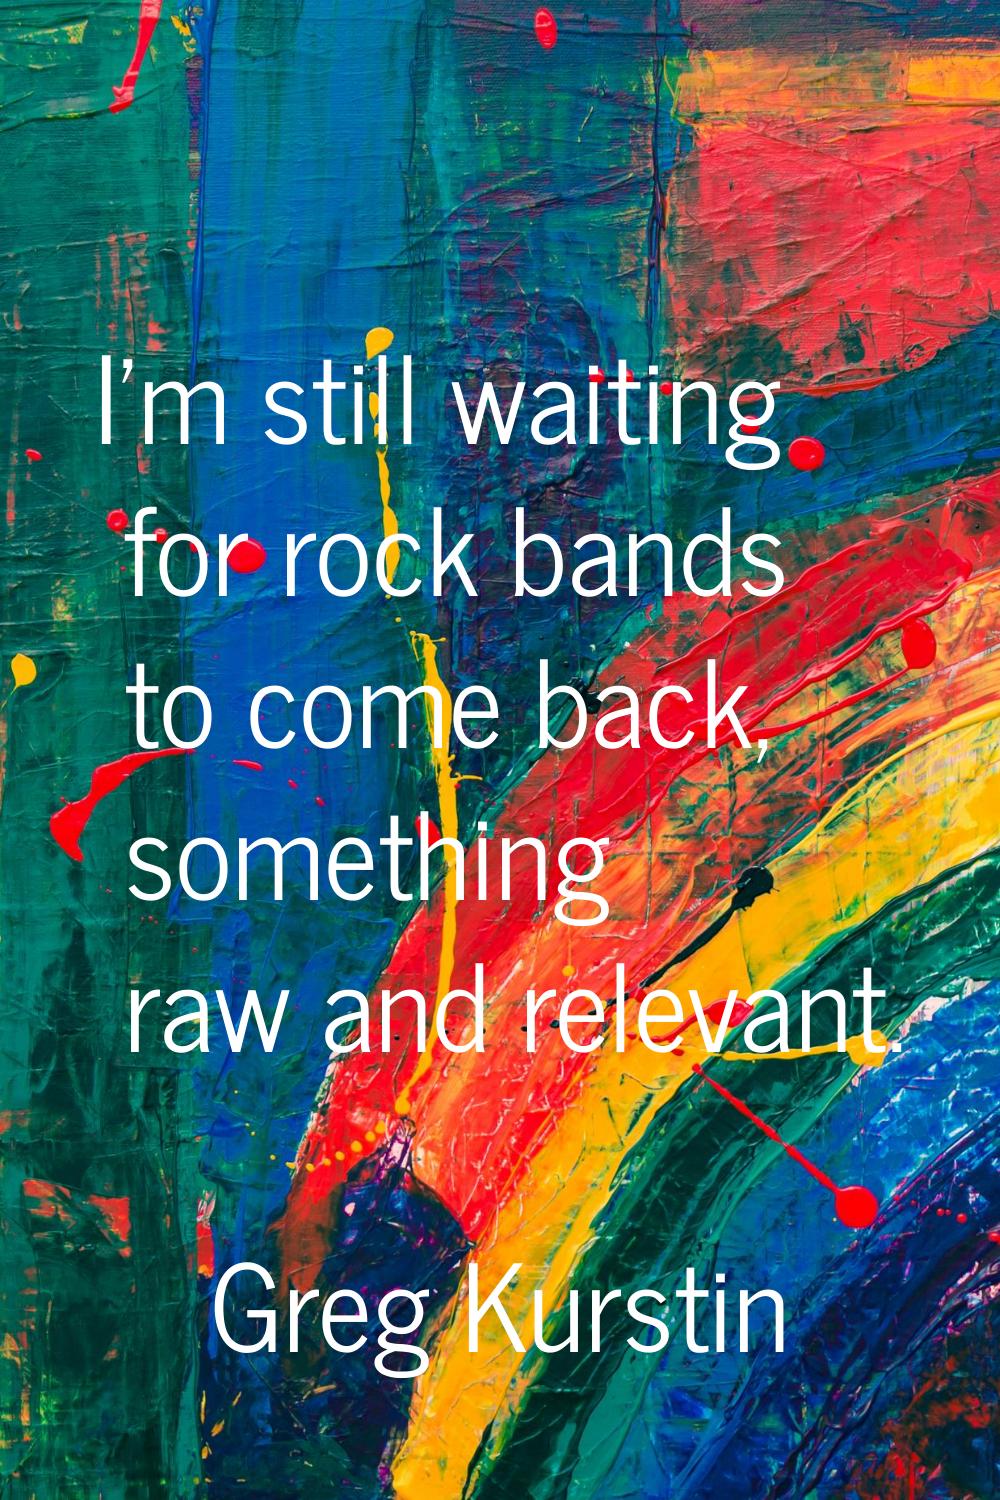 I'm still waiting for rock bands to come back, something raw and relevant.